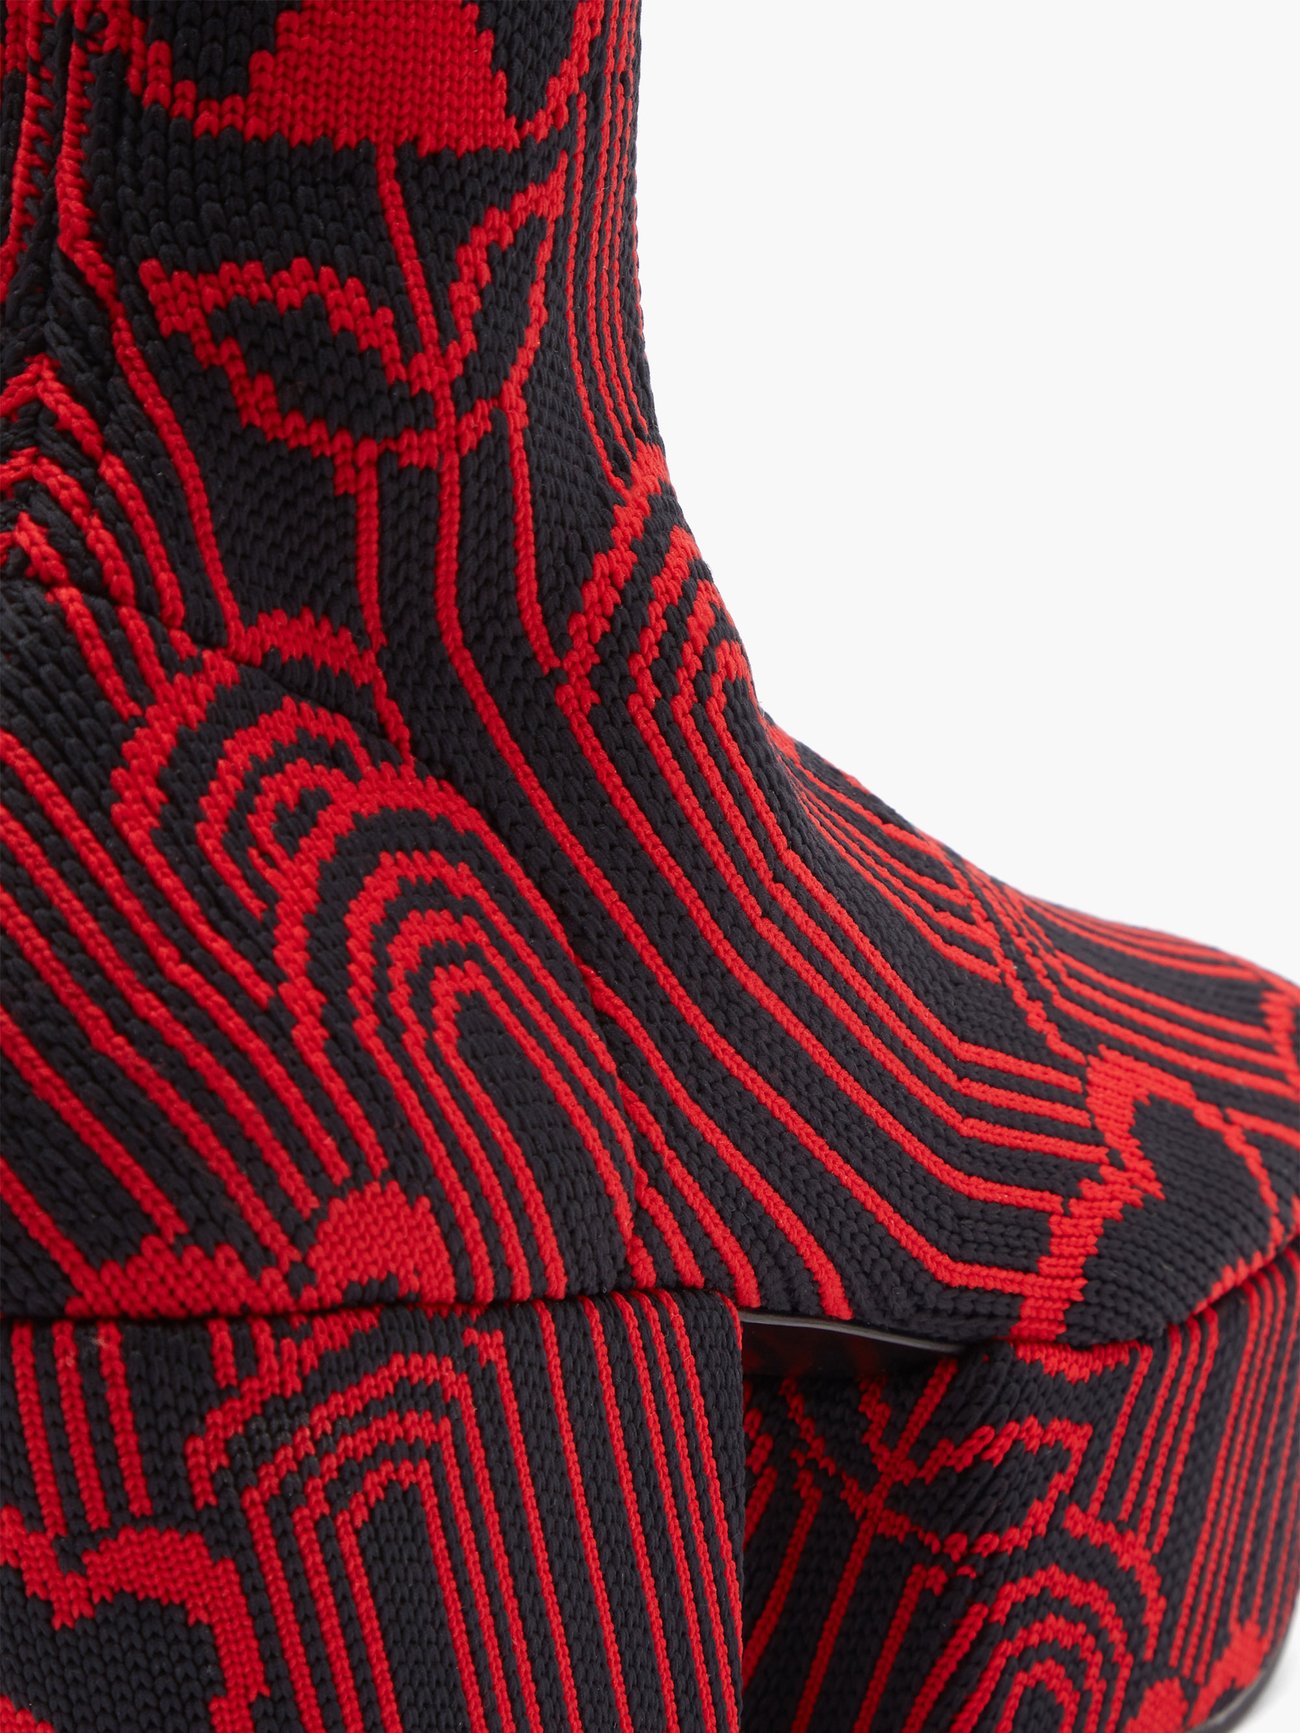 Jaquard Embroidered Boots by Prada in Red color for Luxury Clothing